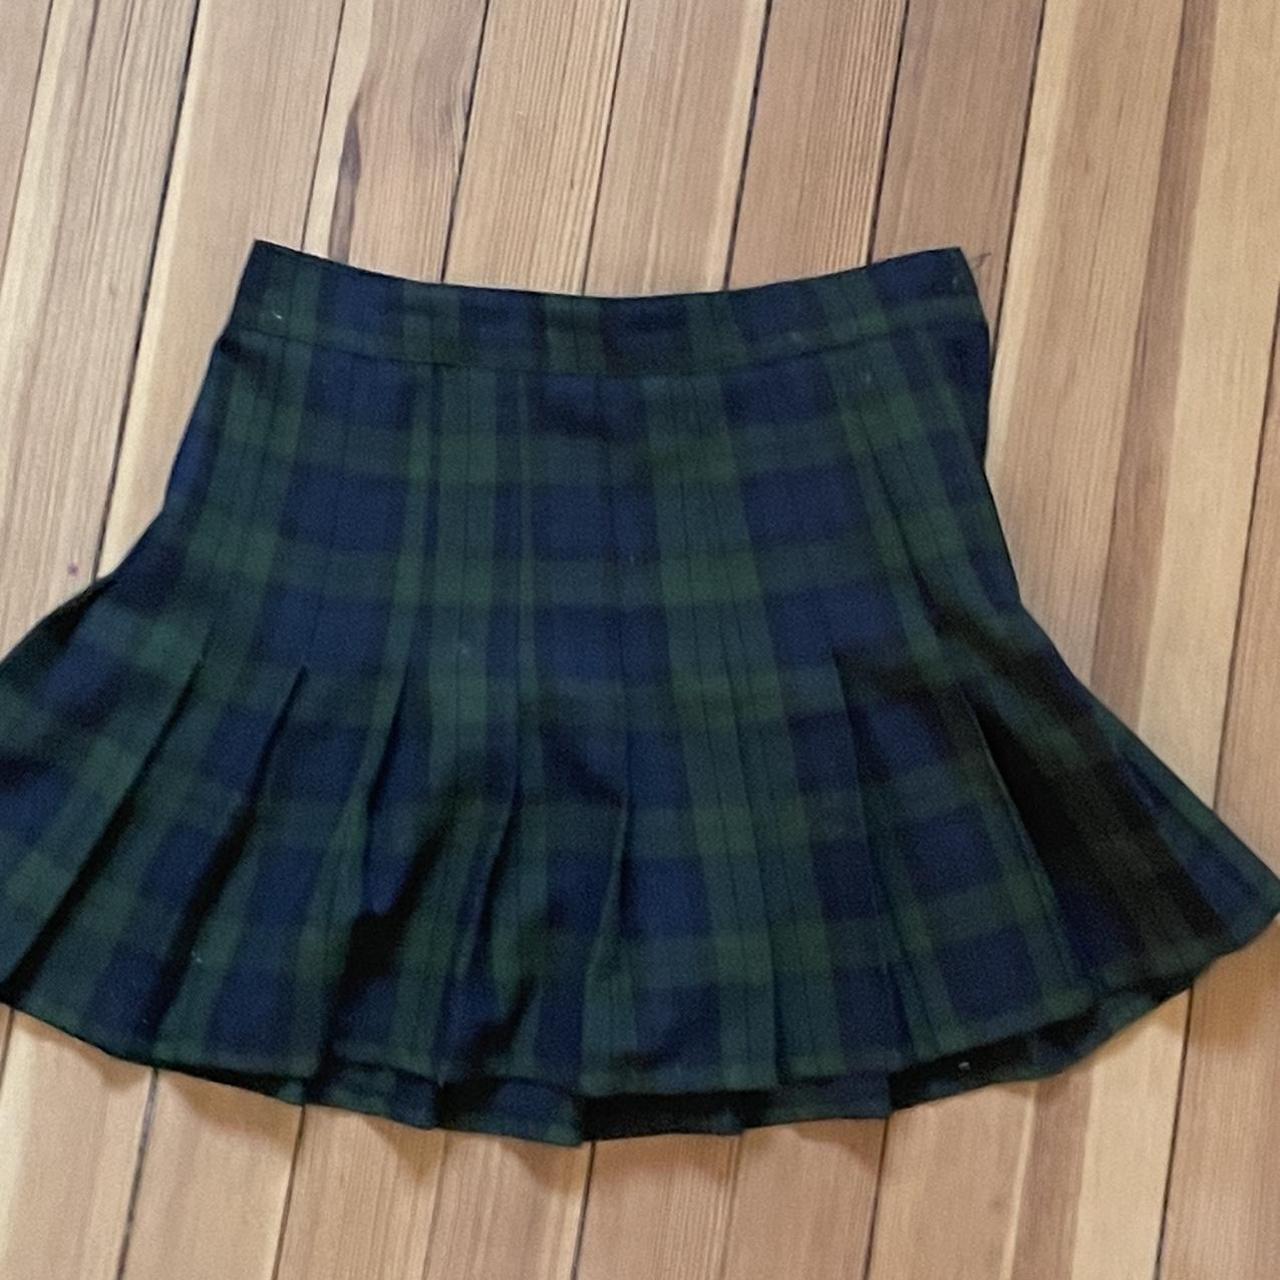 Joules Women's Navy and Green Skirt